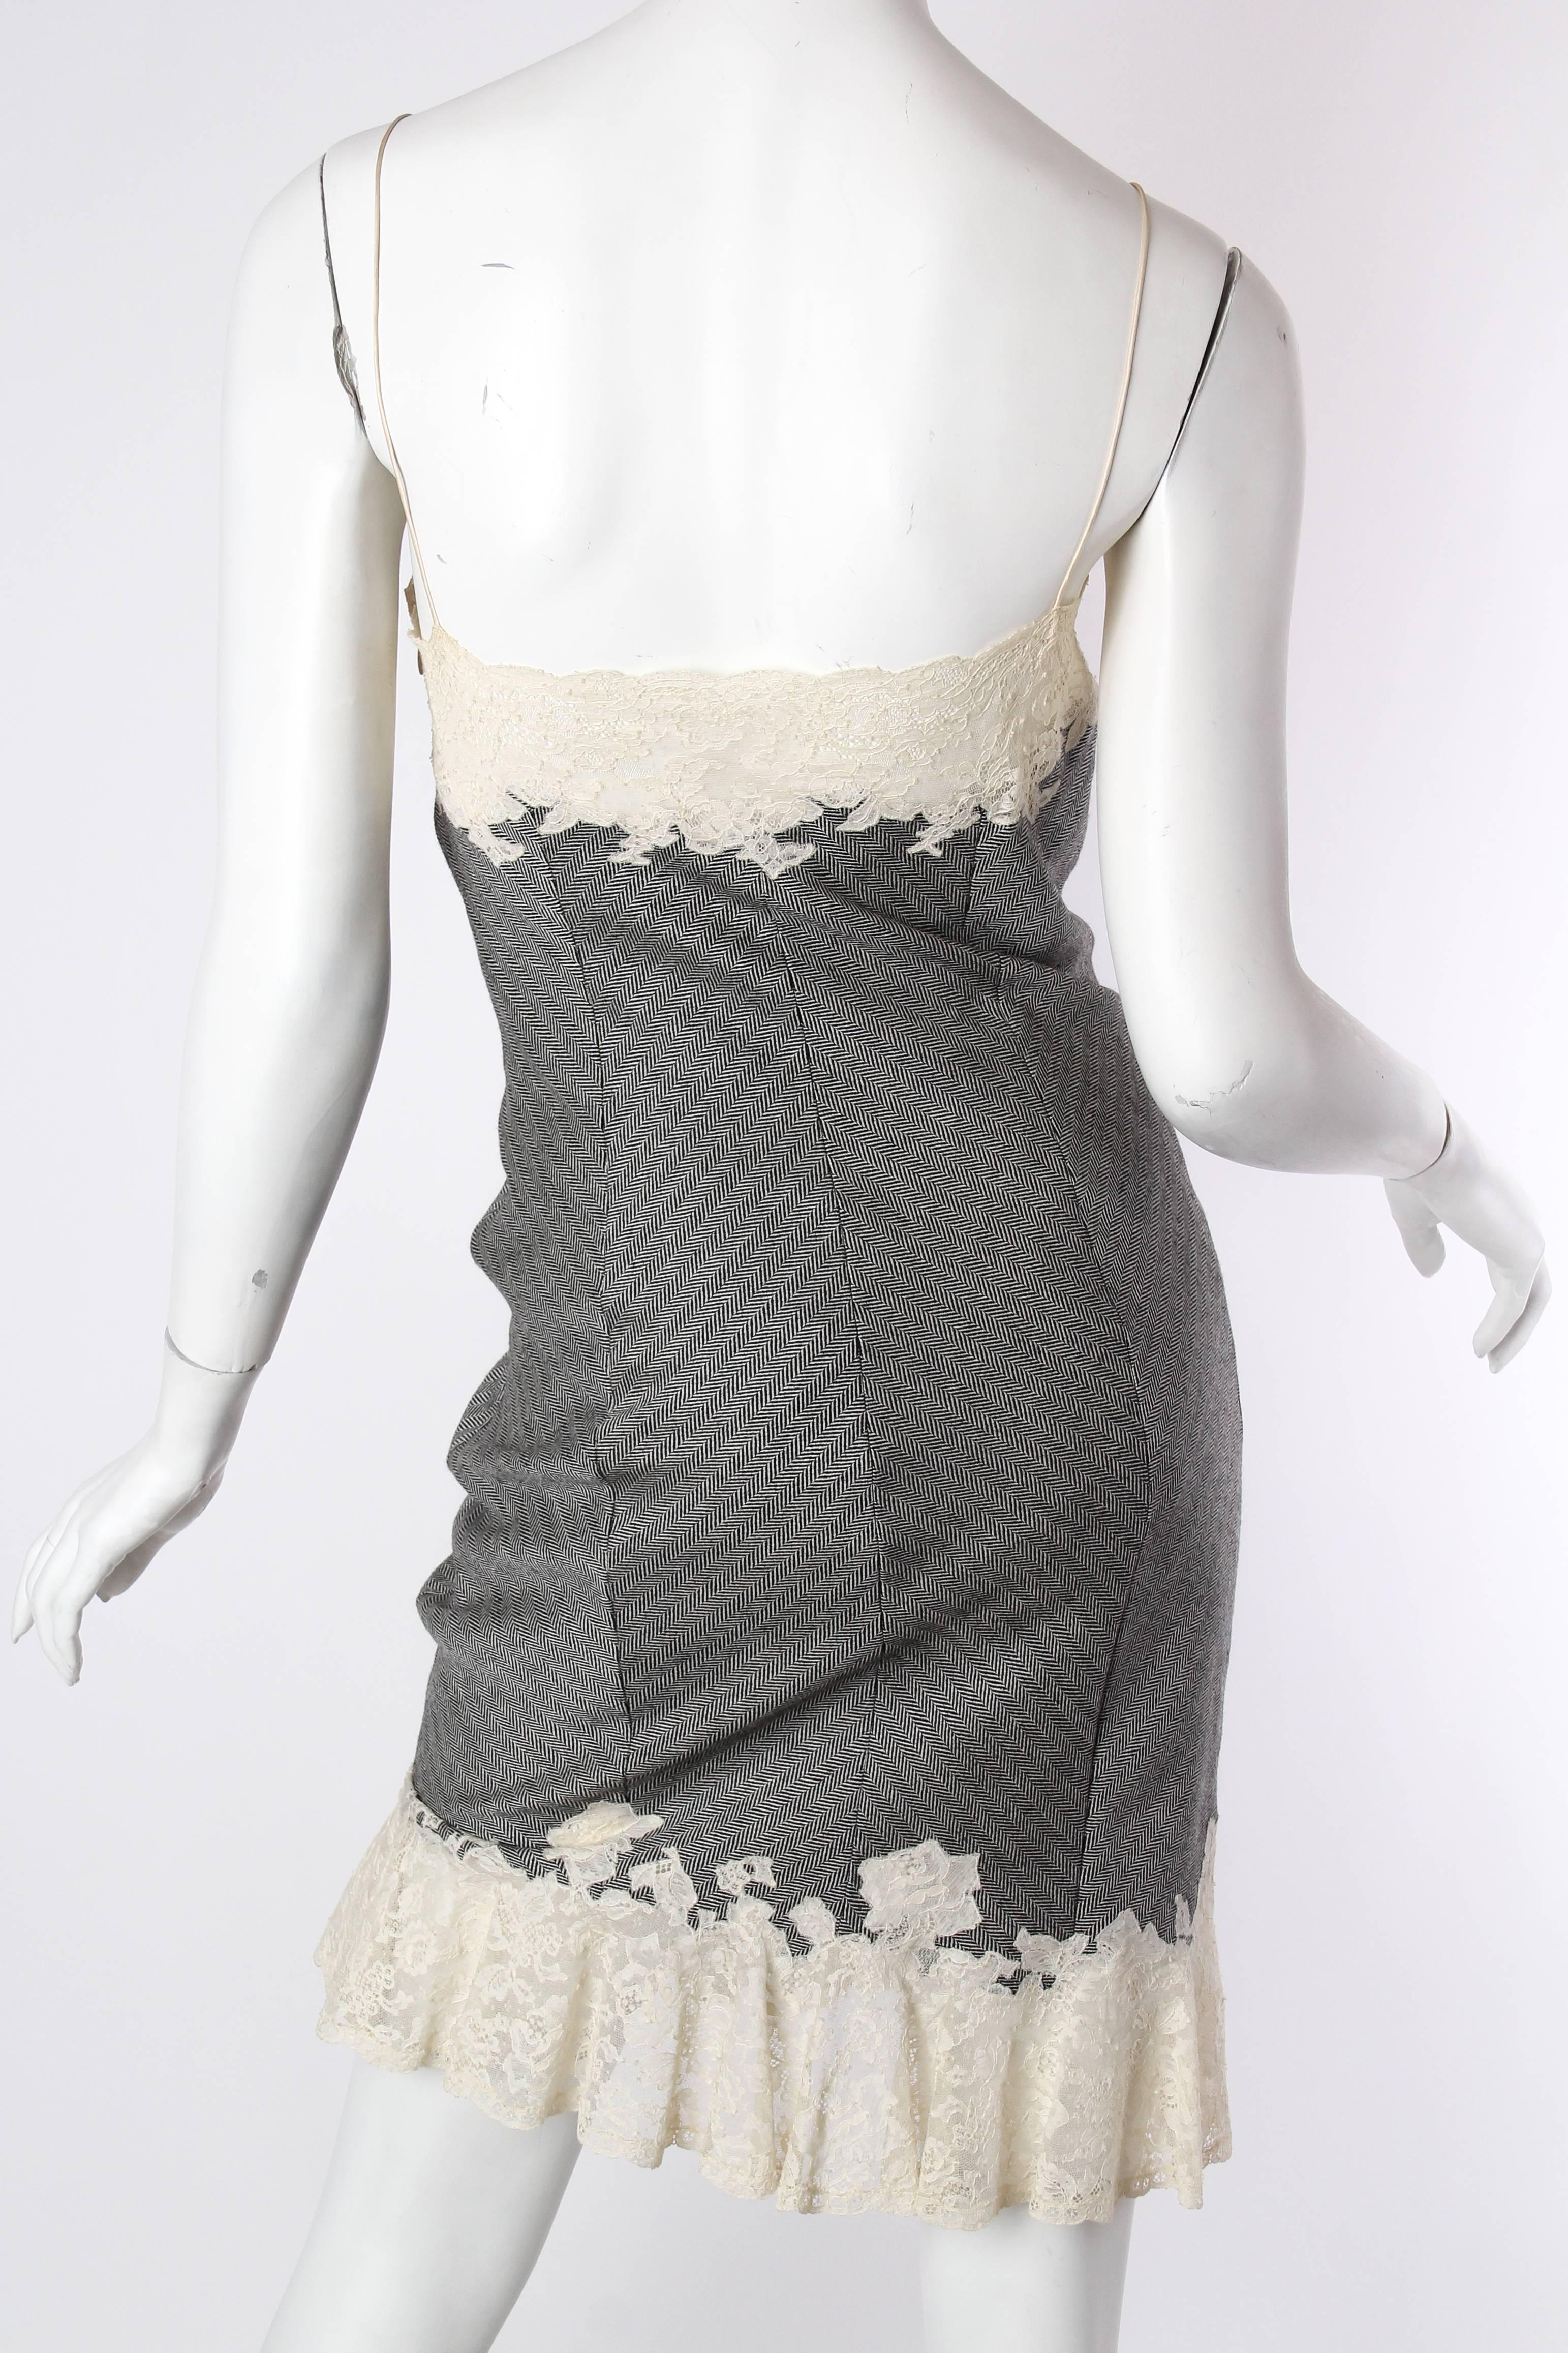 John Galliano for Christian Dior 1998 Bias Cut Lingerie Slip Dress In Excellent Condition In New York, NY